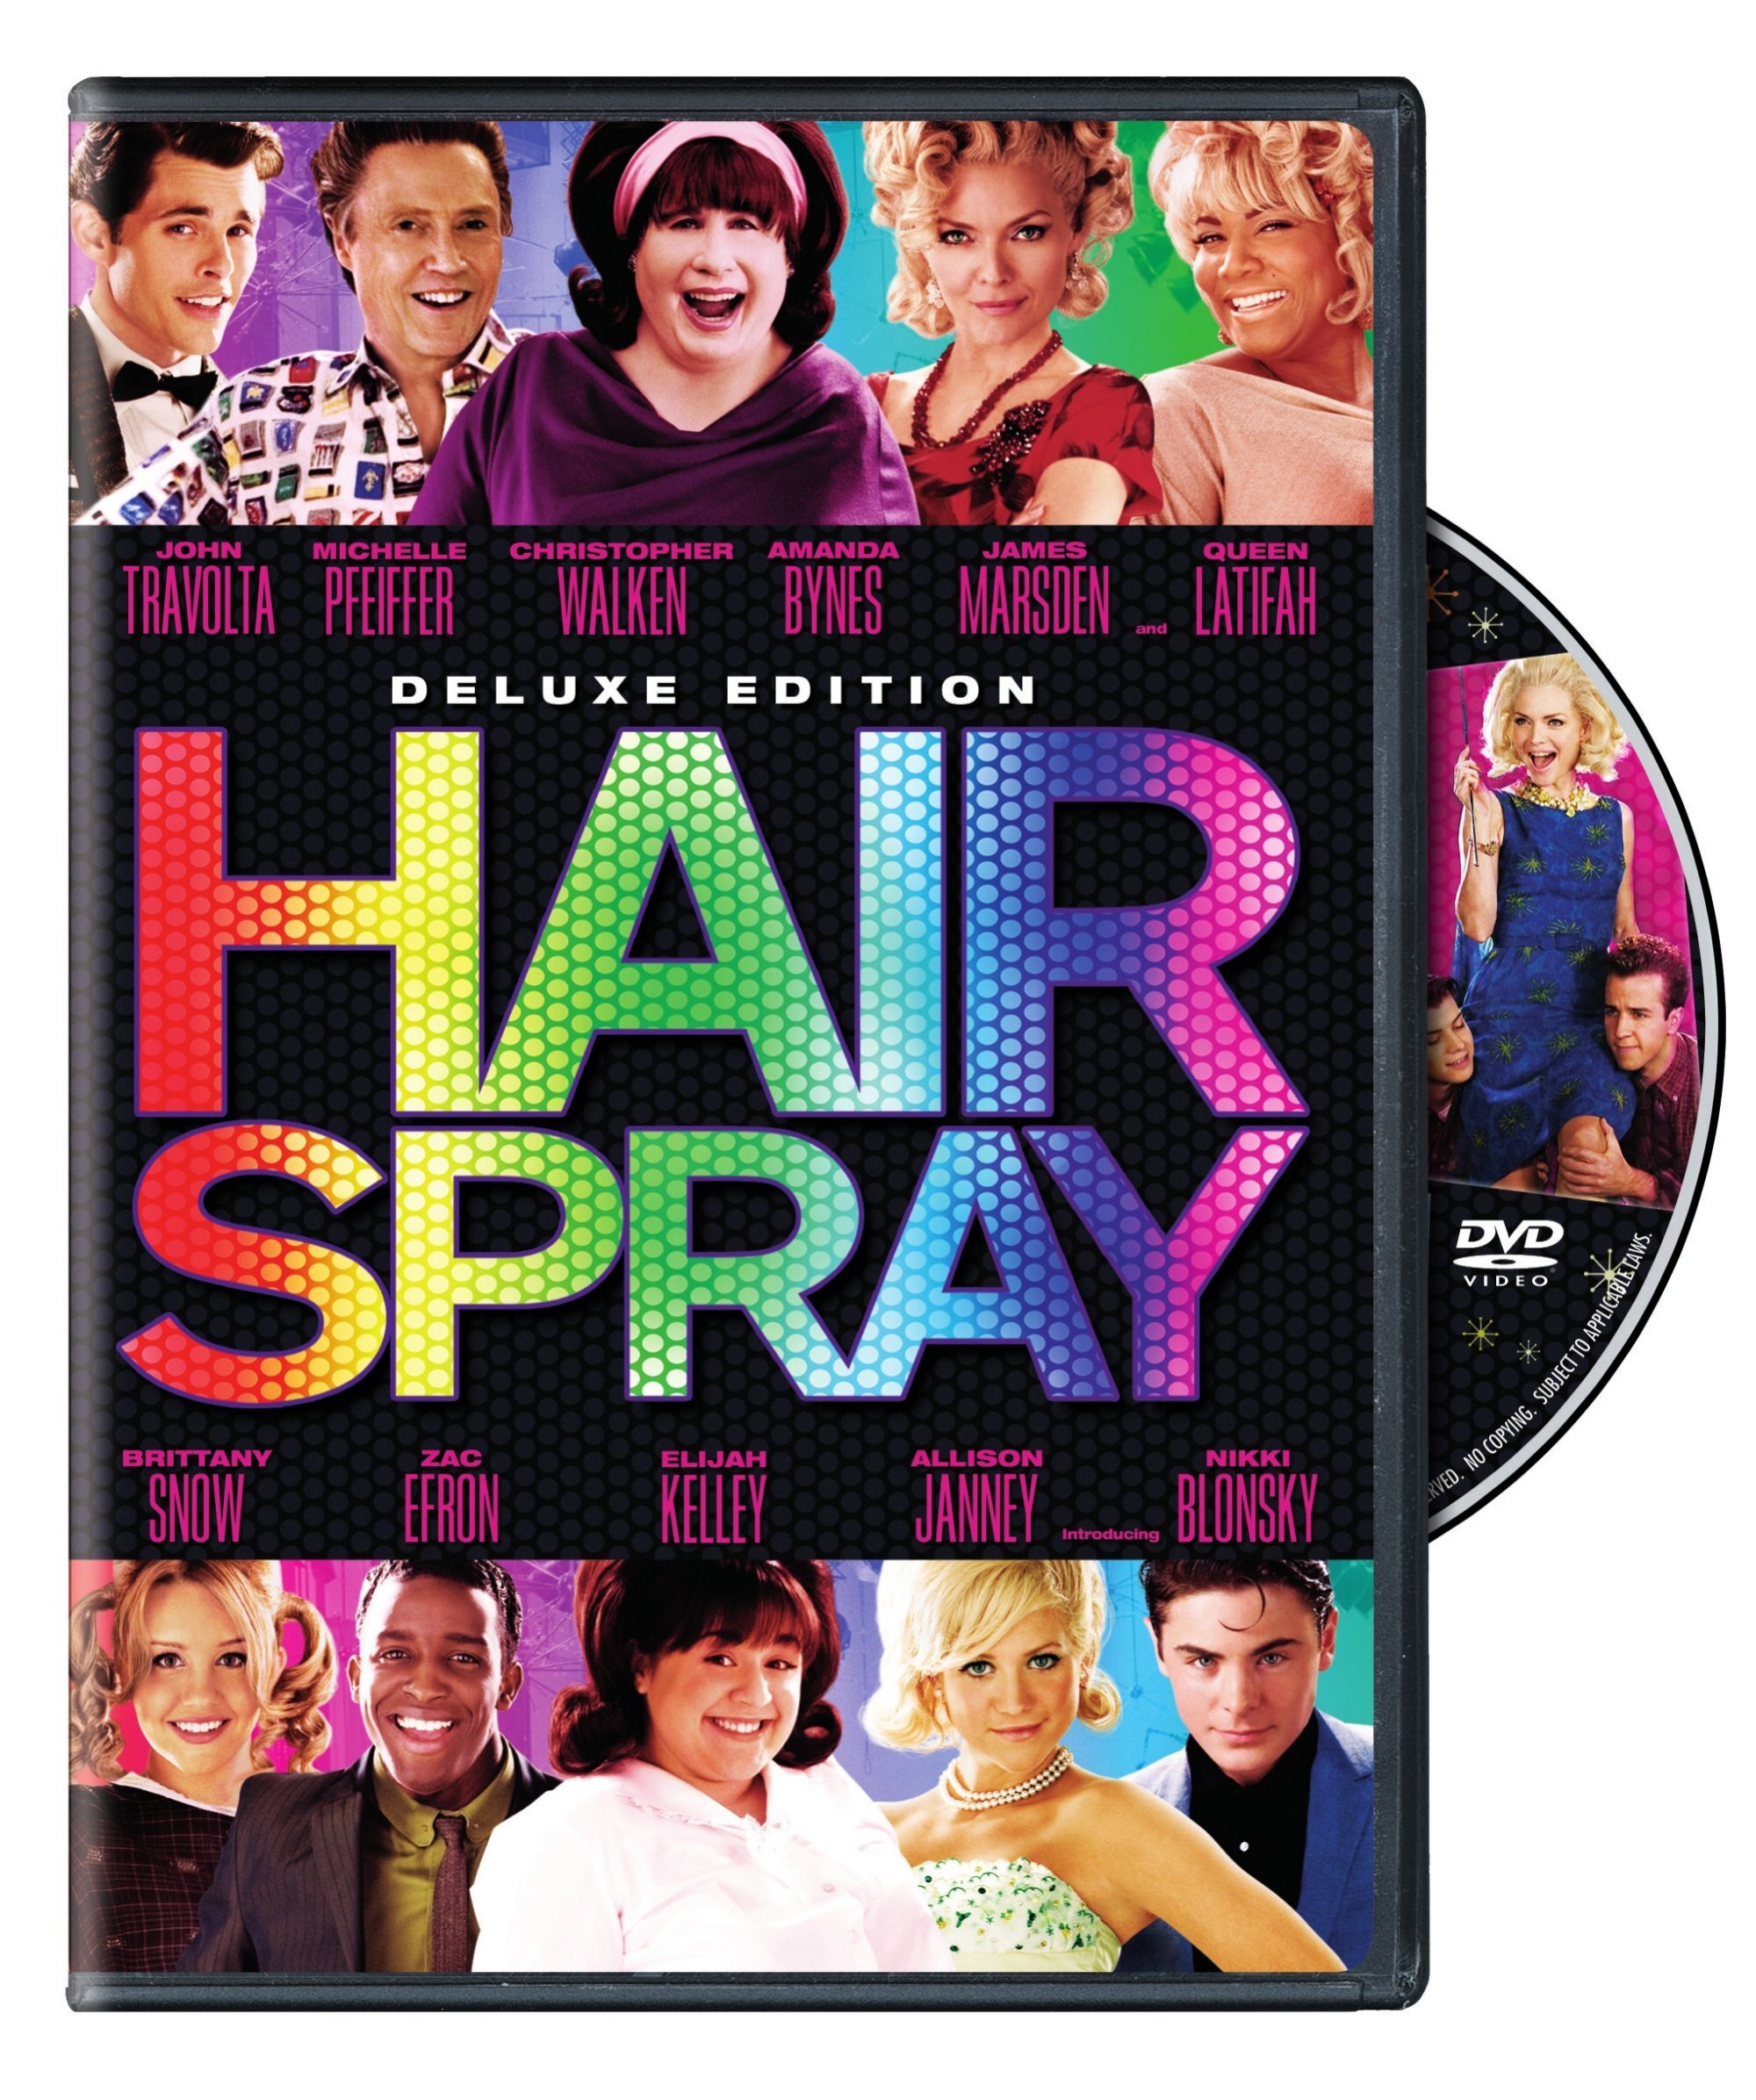 Hairspray (Deluxe Edition) - DVD [ 2007 ]  - Comedy Movies On DVD - Movies On GRUV